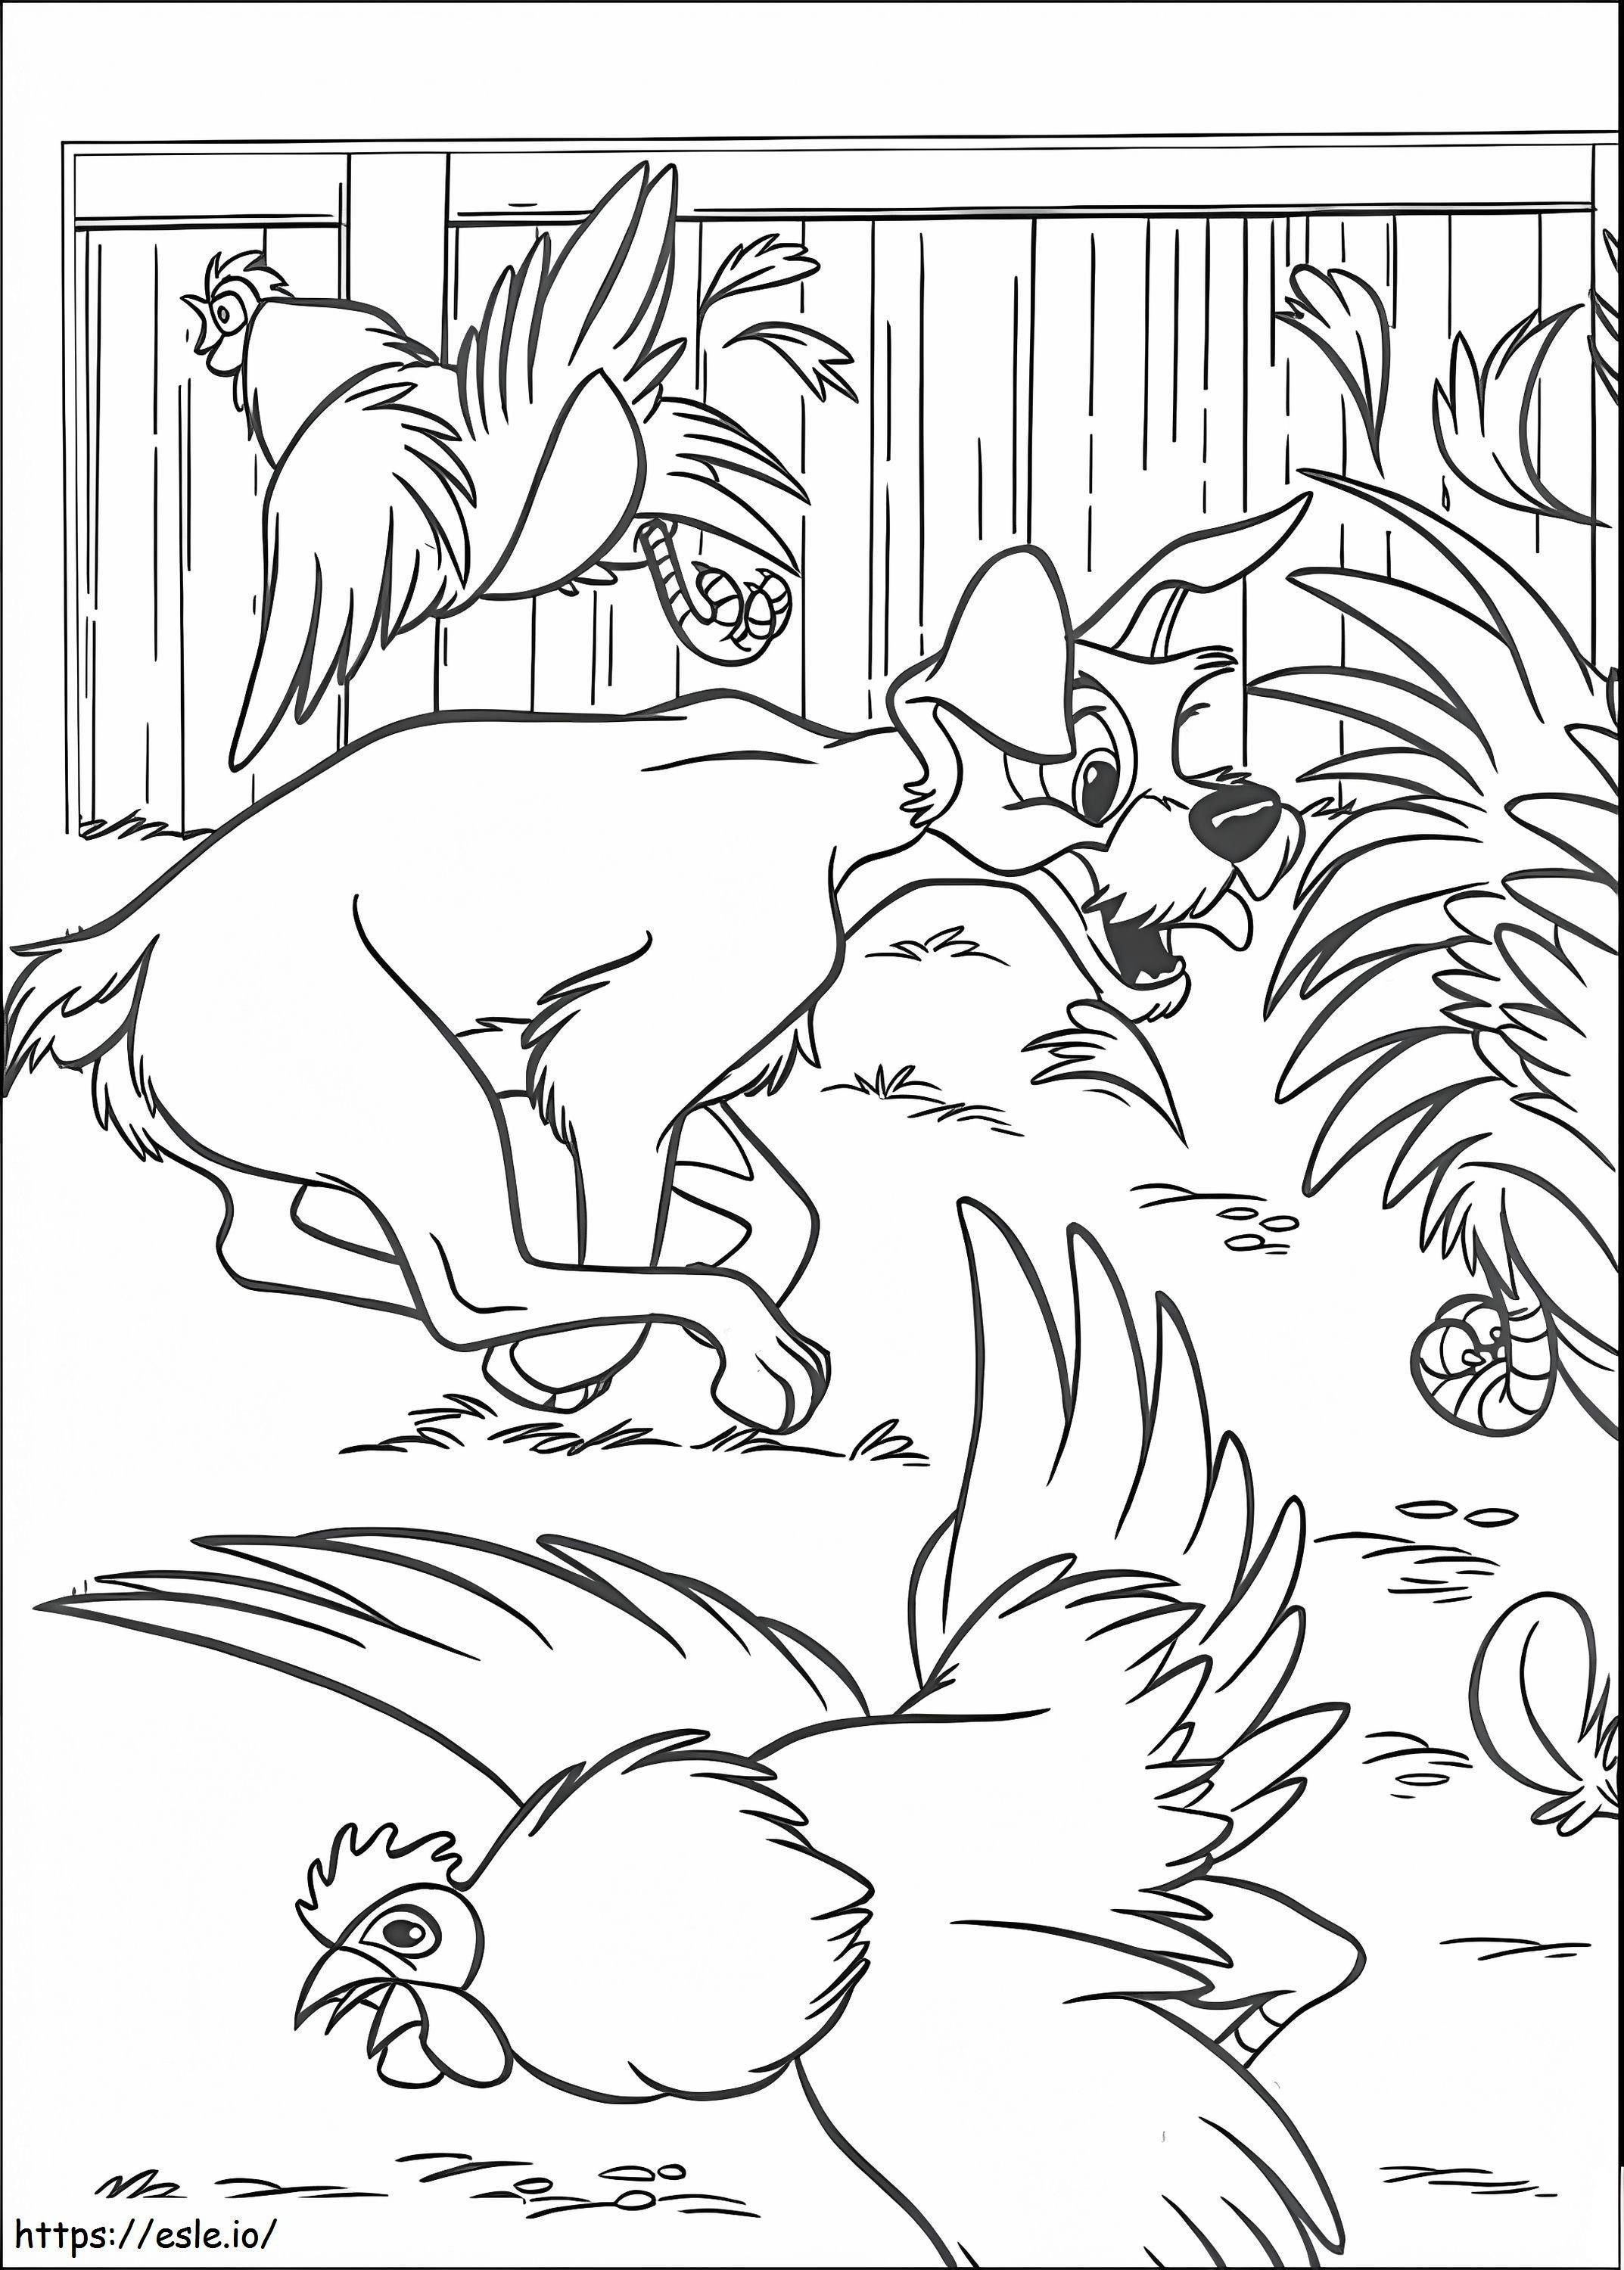 The Tramp And Chickens coloring page